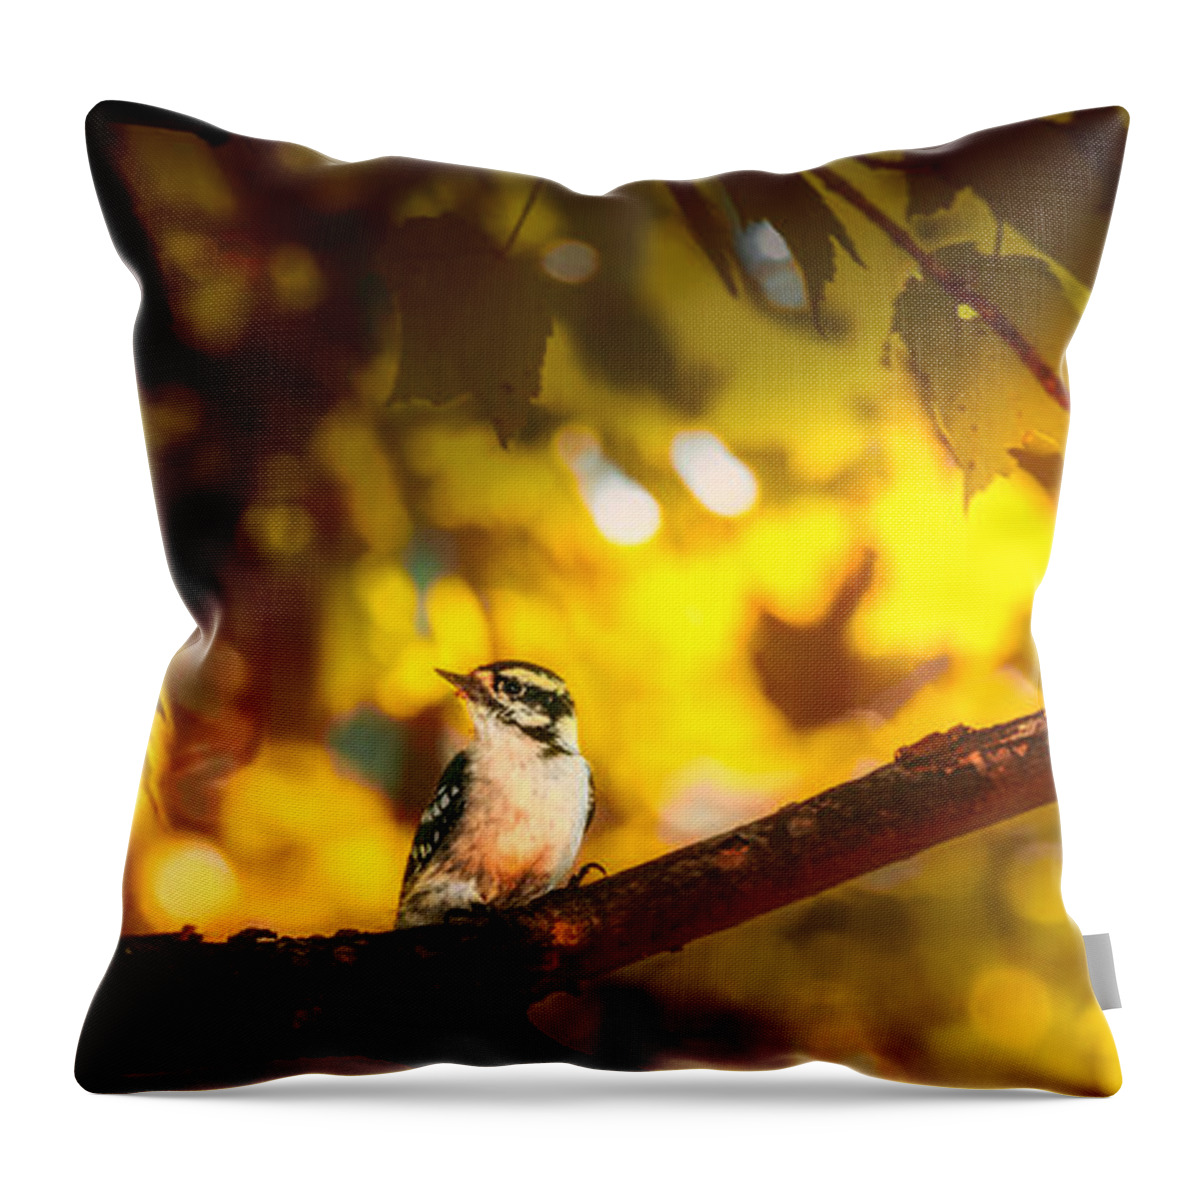 Woodpecker Throw Pillow featuring the photograph Two Downy Woodpeckers by Bob Orsillo